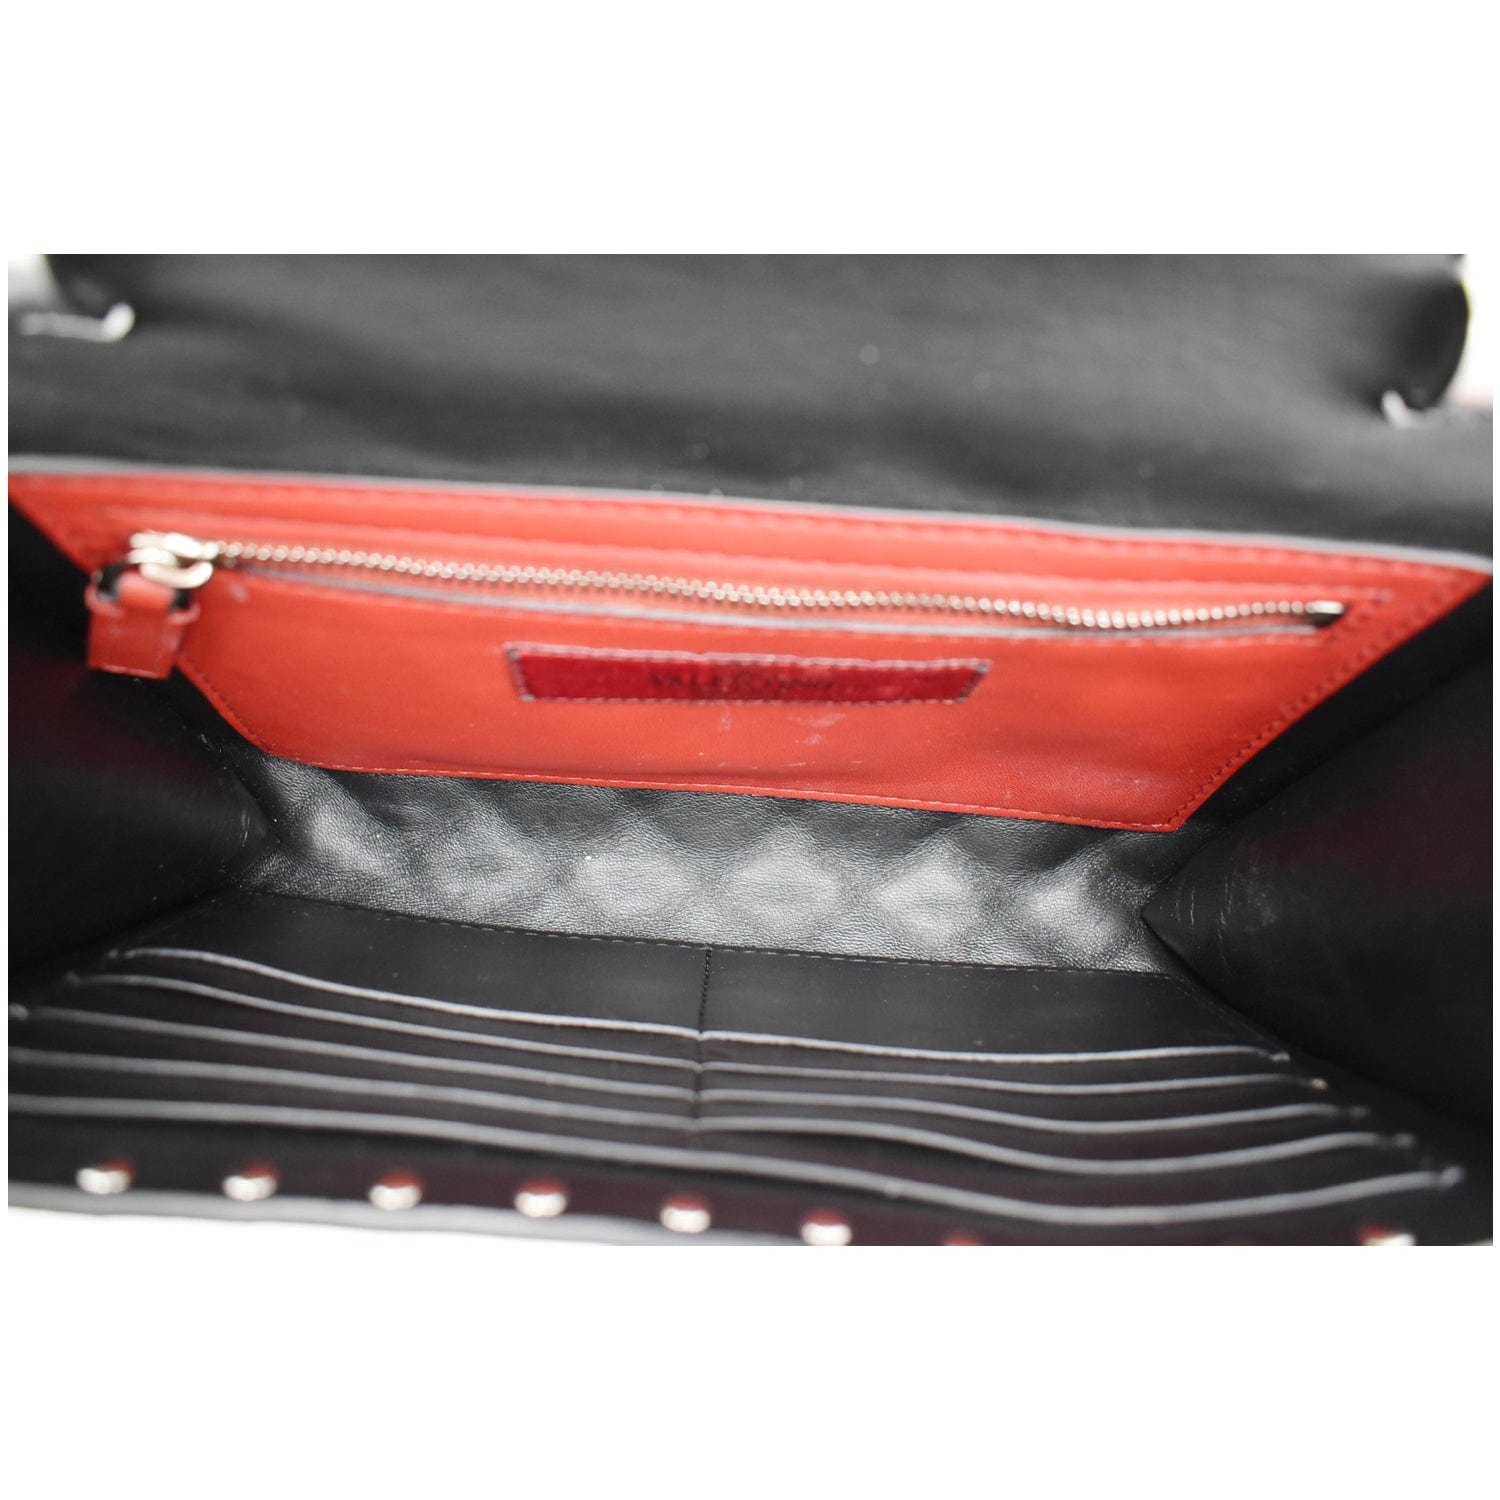 Valentino Small Clutch Bags for Women, Authenticity Guaranteed